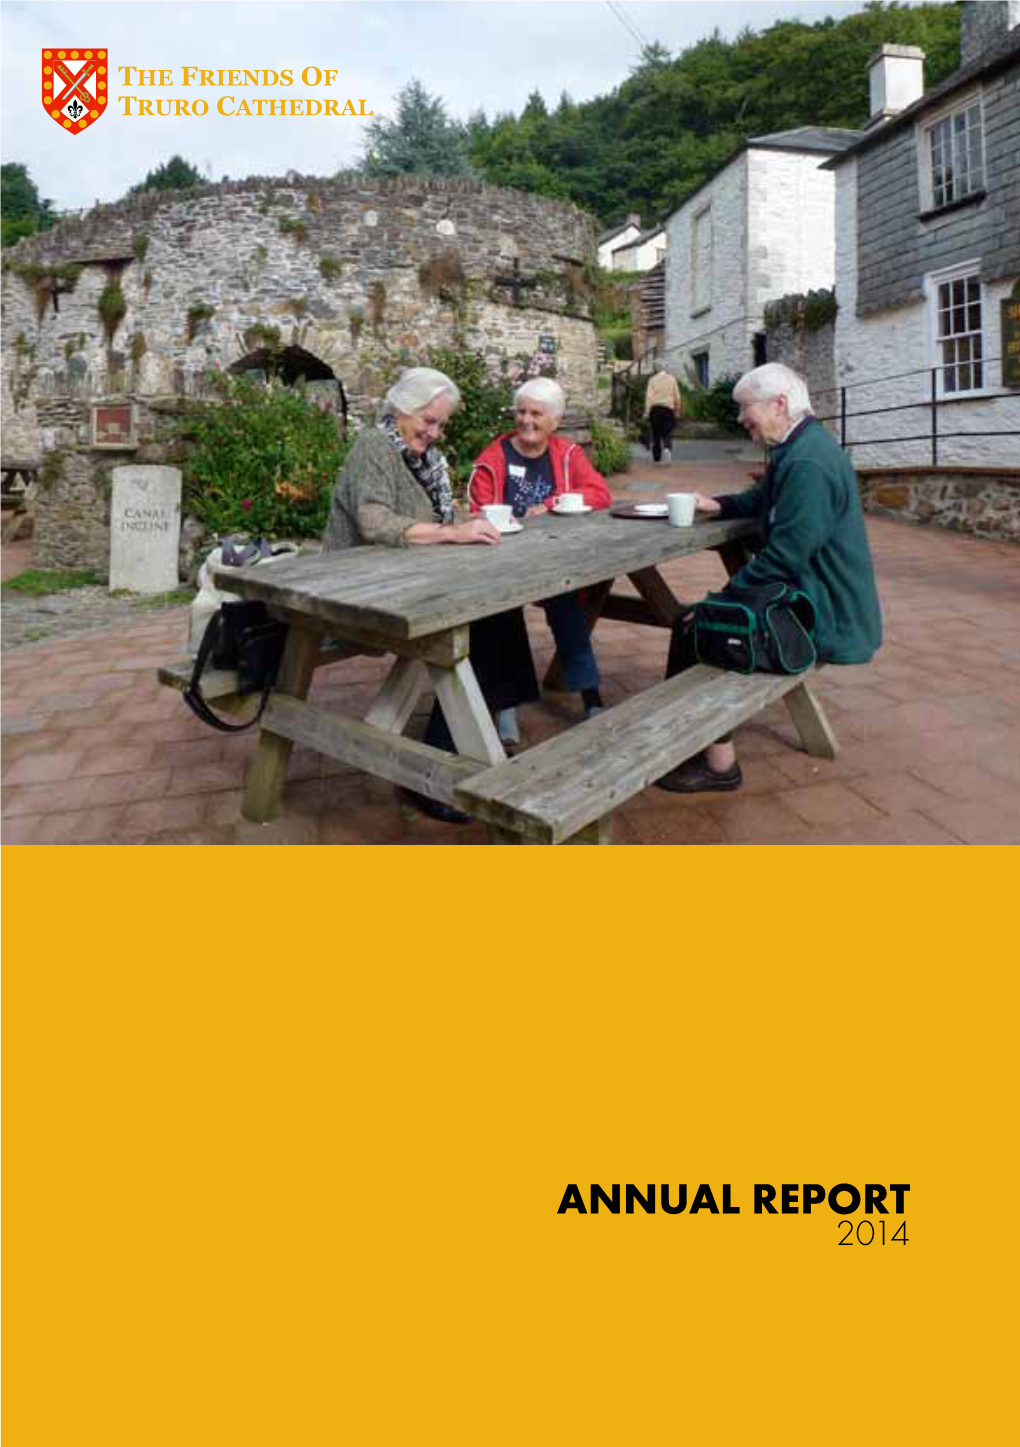 Annual Report 2014 the Friends of Truro Cathedral